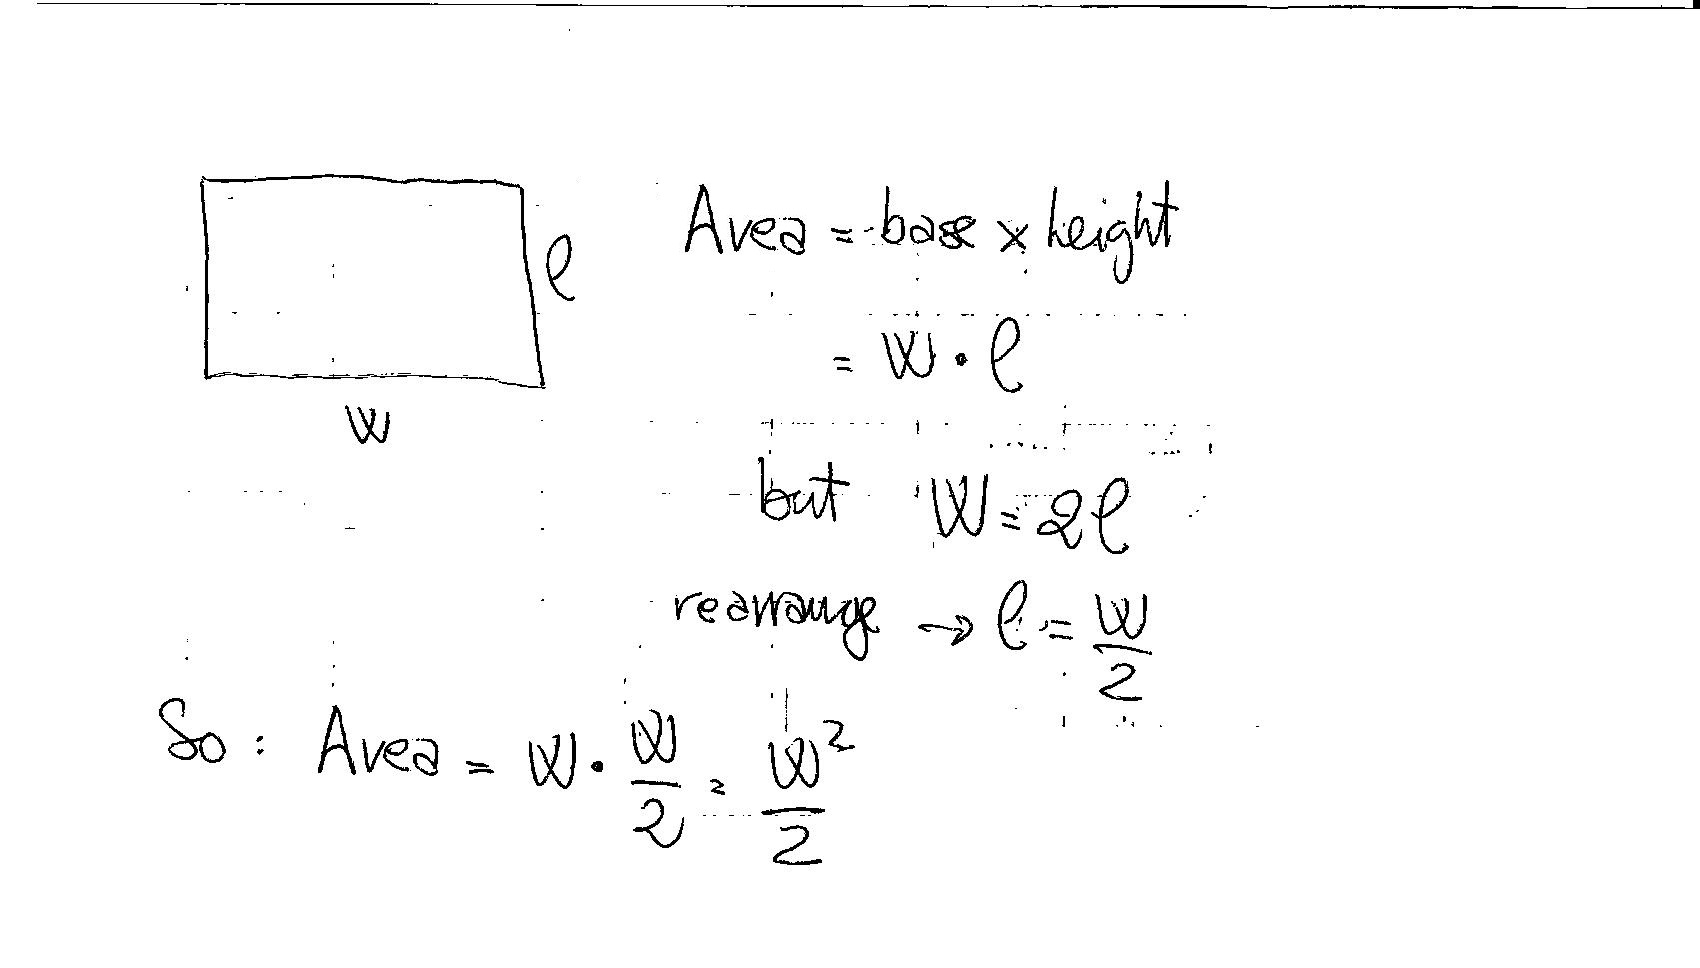 How do you express the area A of a rectangle as a function of the